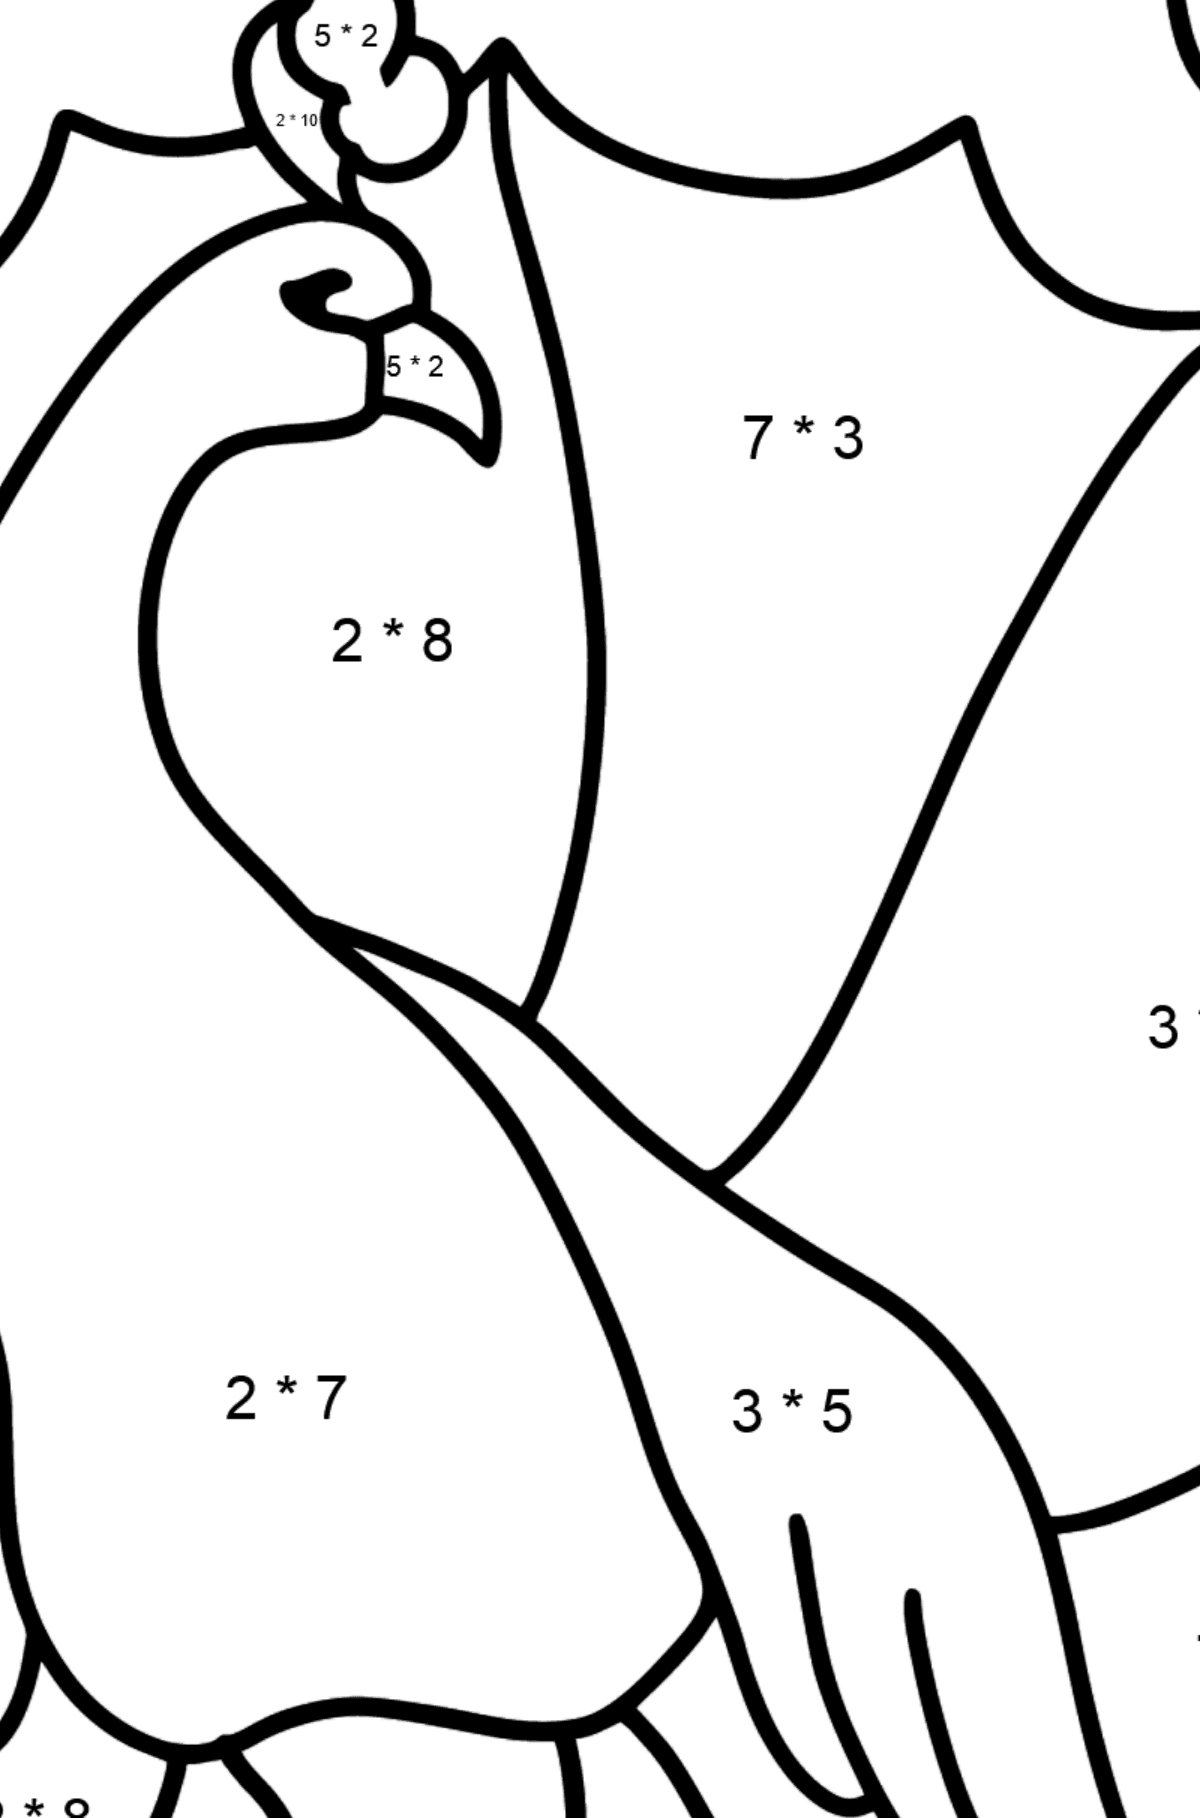 Peacock coloring page - Math Coloring - Multiplication for Kids